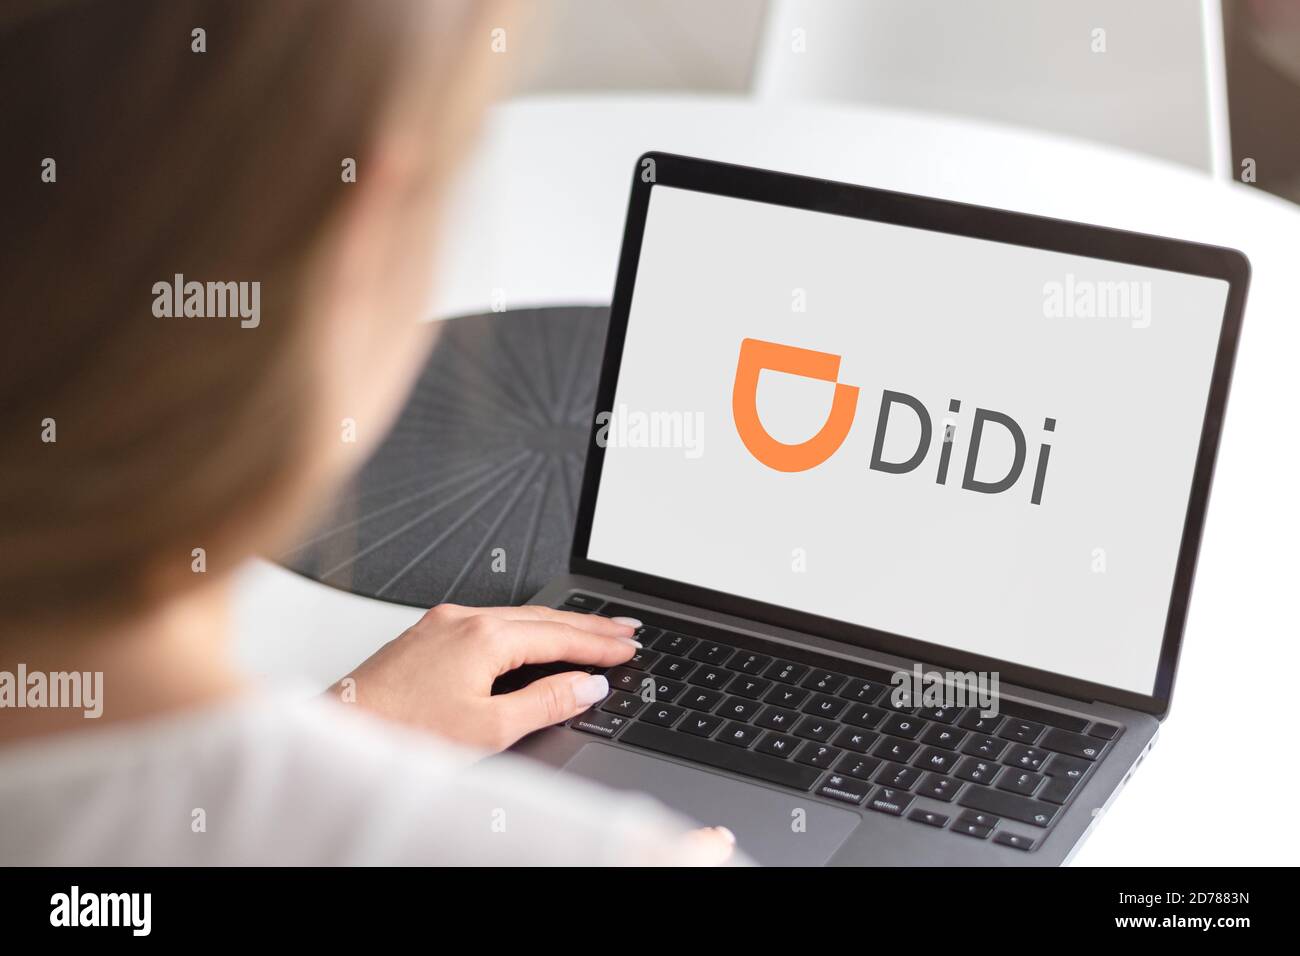 Guilherand-Granges, France - October 21, 2020. Notebook with DiDi Chuxing logo. Chinese vehicle for hire company. Stock Photo